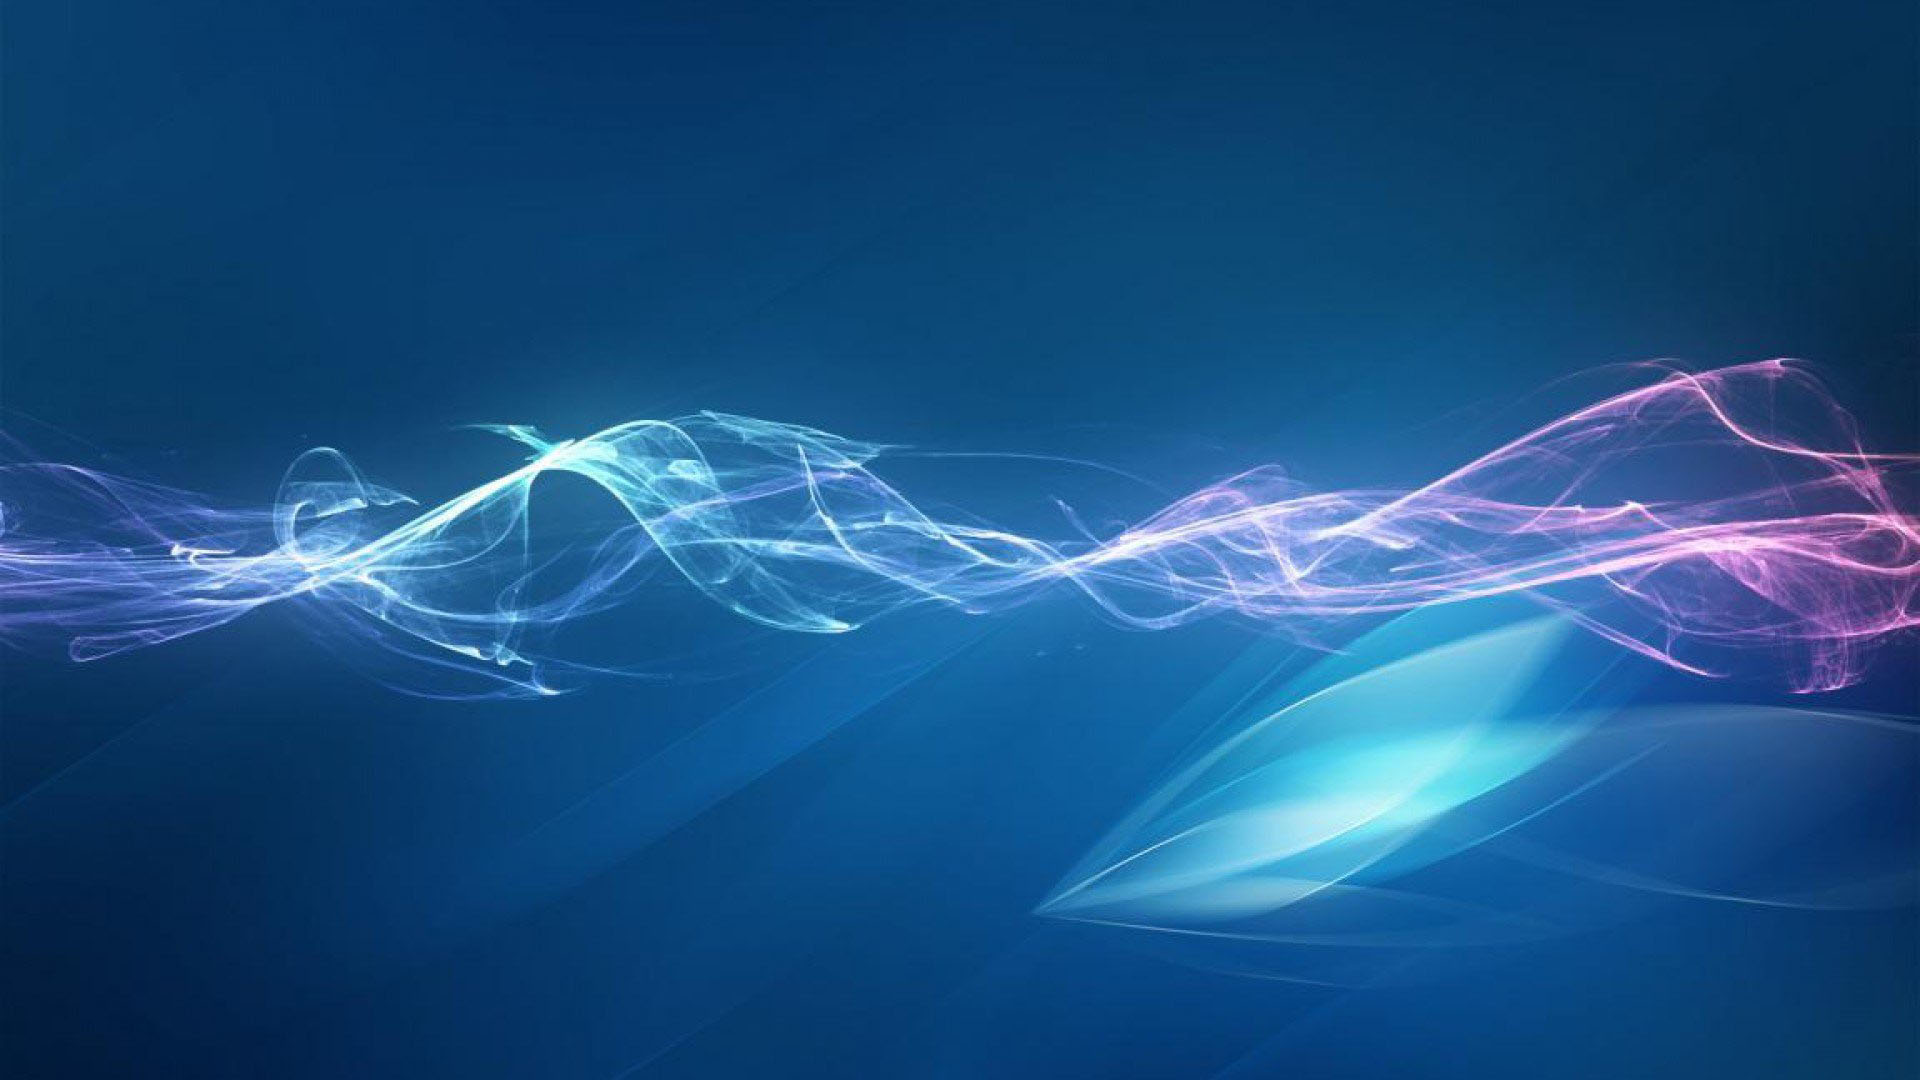 Blue Desktop Wallpaper In High Quality Daily Background HD